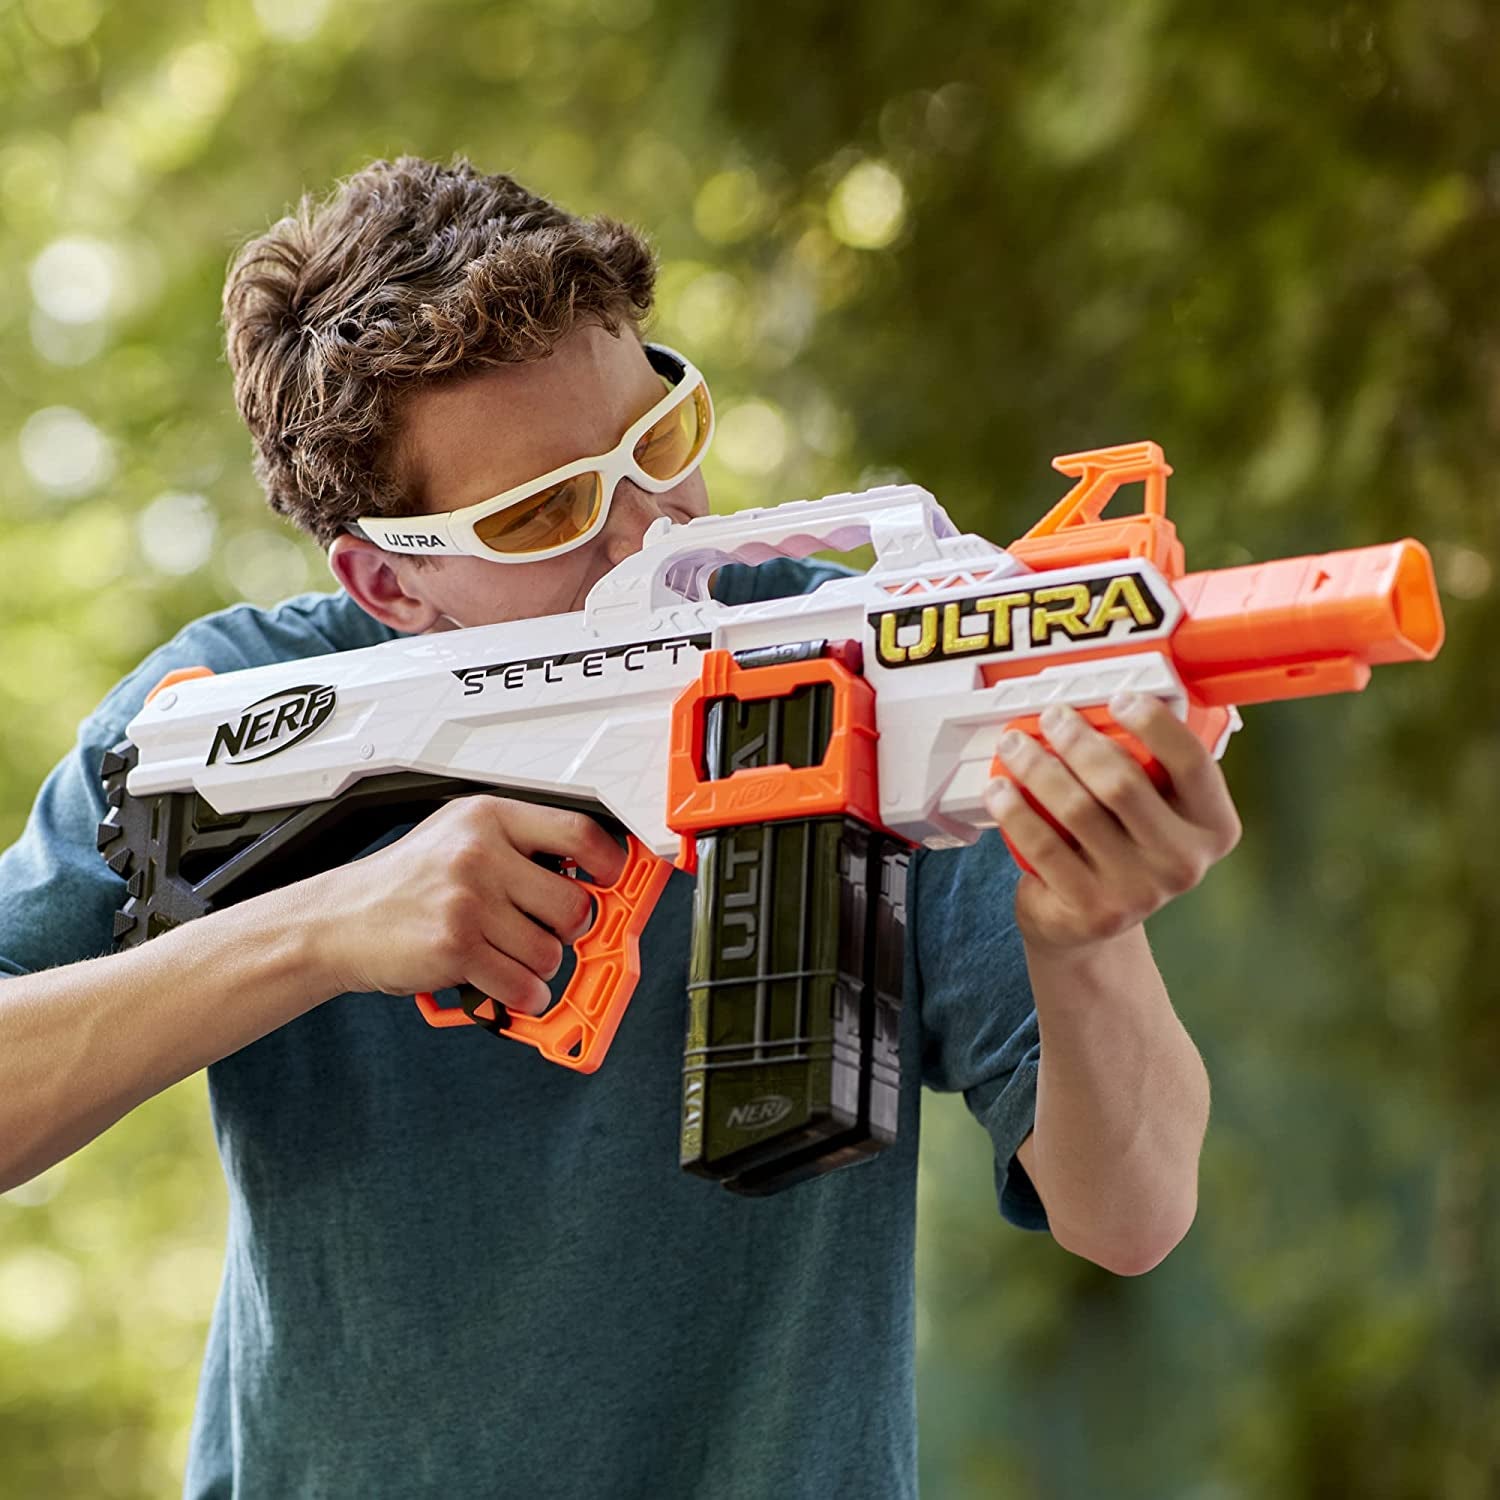 Nerf Ultra Select Fully Motorized Blaster, Fire 2 Ways, Includes Clips and  Darts, Compatible Only with Nerf Ultra Darts - Nerf